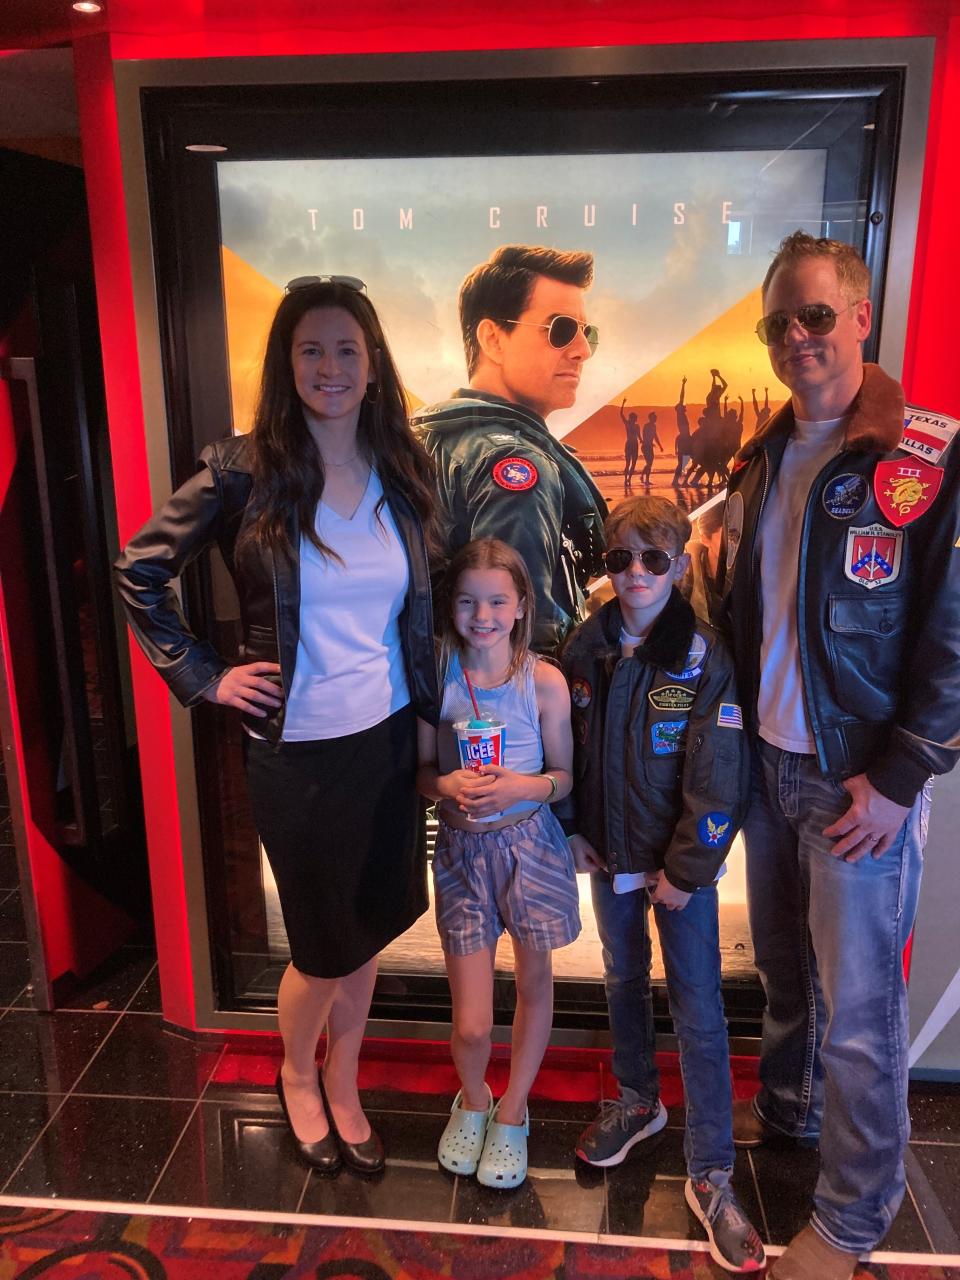 Chris Dickes (right) poses with his family members in front of a poster for "Top Gun: Maverick," where he appeared as an extra.